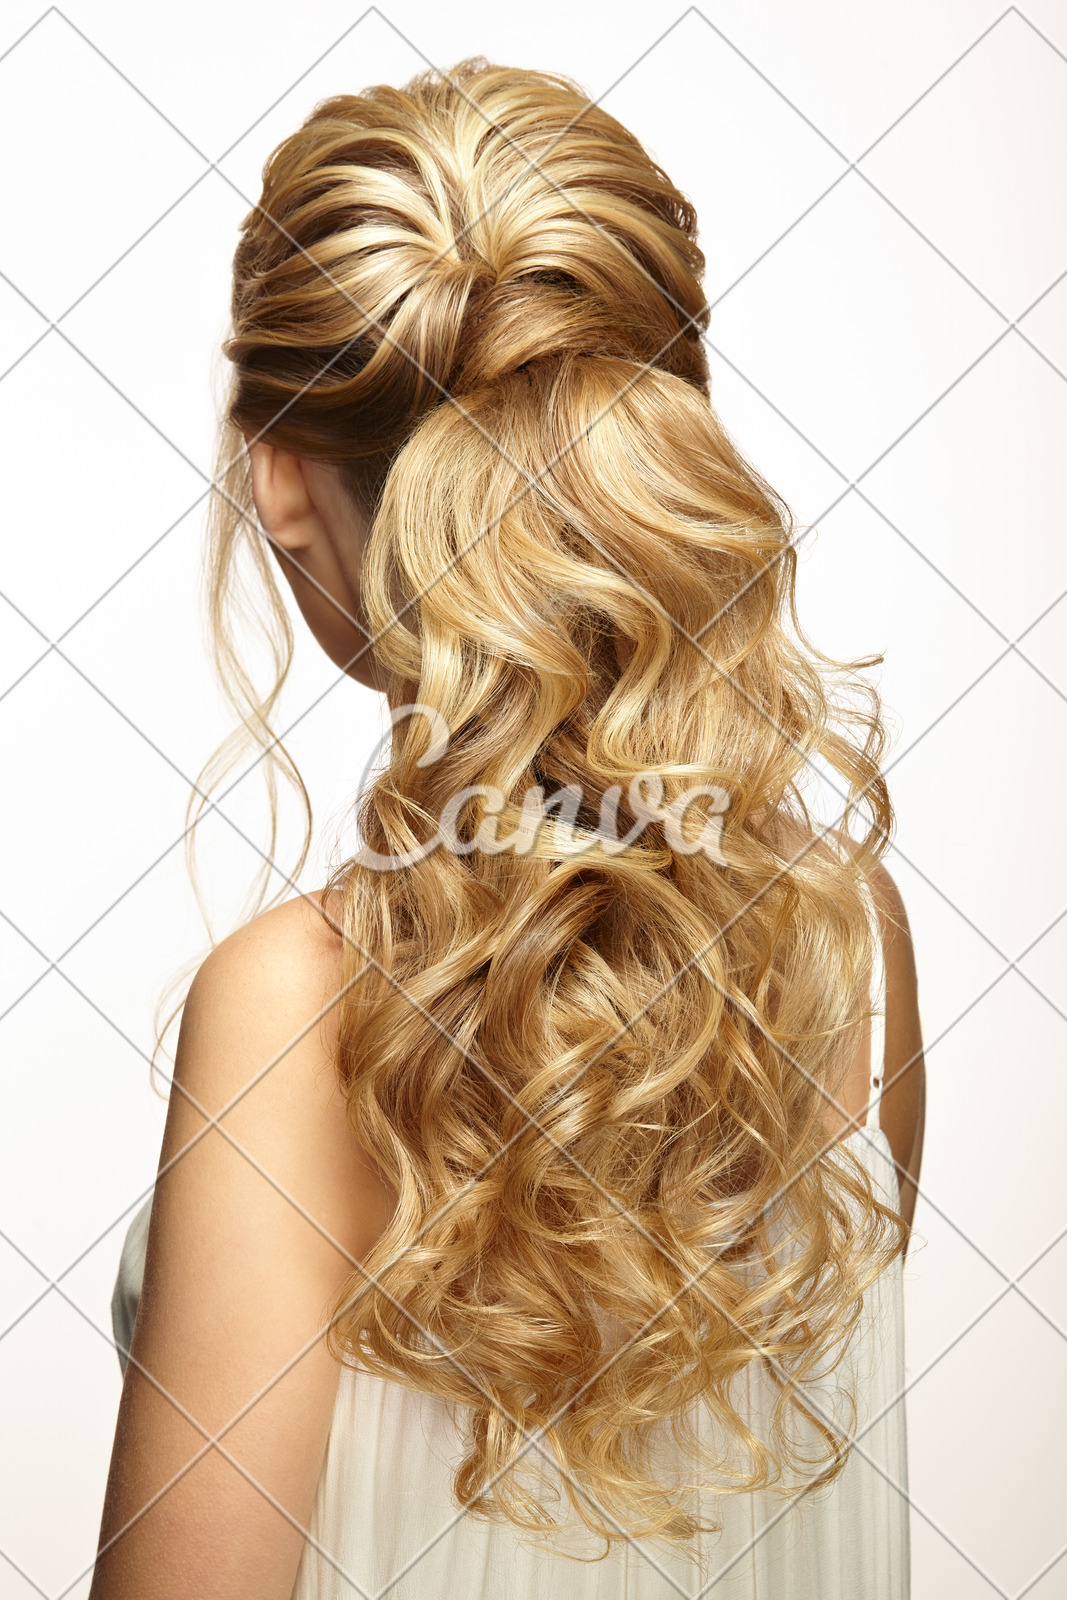 Blonde Girl With Long And Shiny Curly Hair Photos By Canva